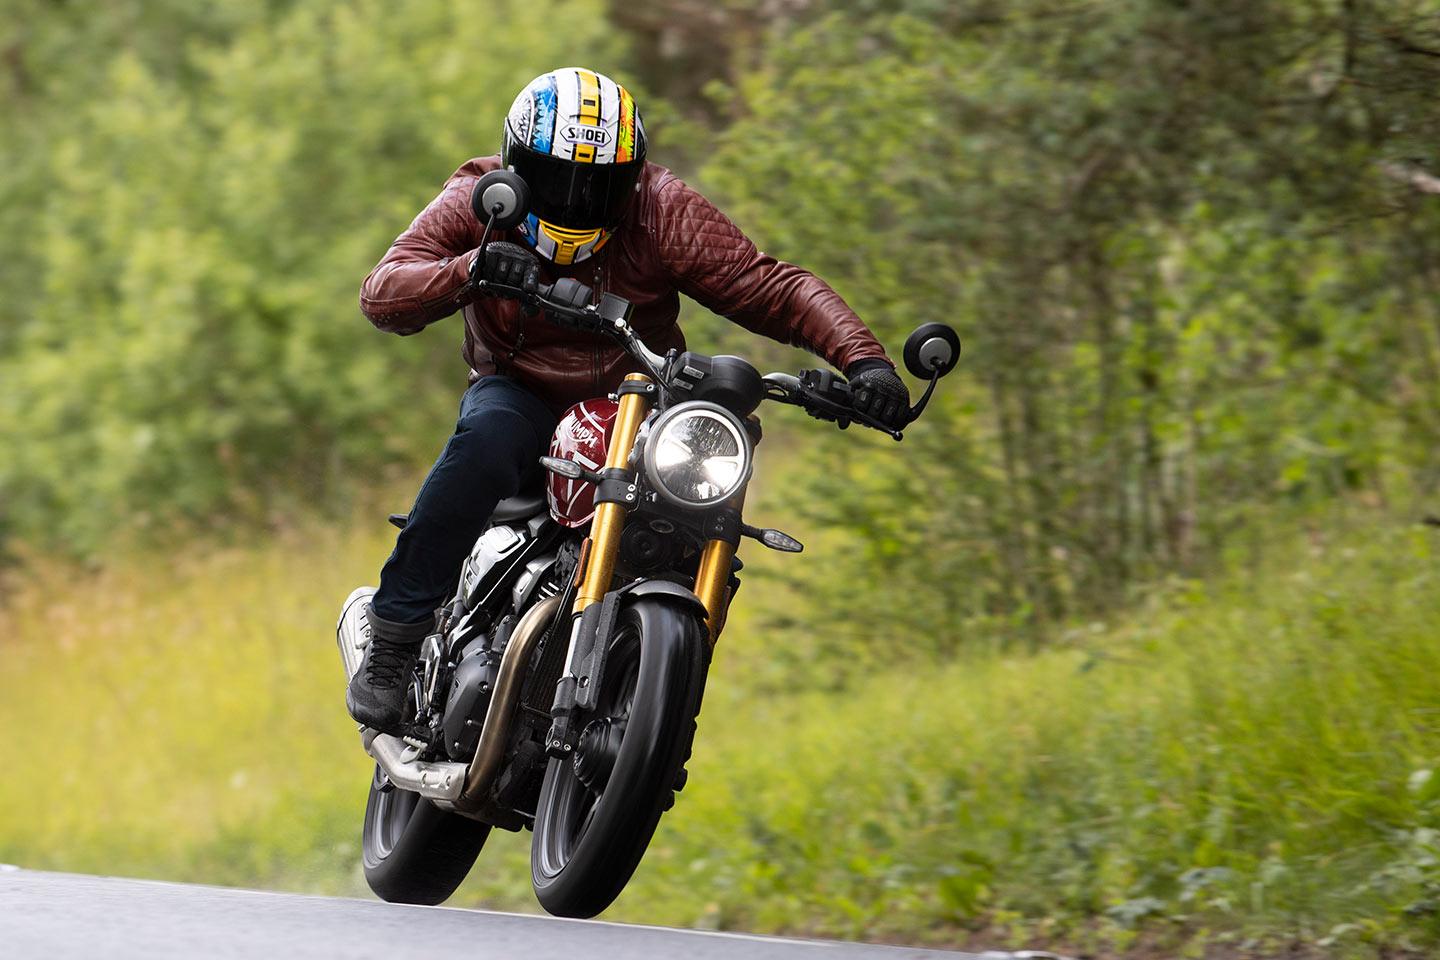 At speed, a bystander may mistake the Speed 400 for one of Triumph’s larger Modern Classics.